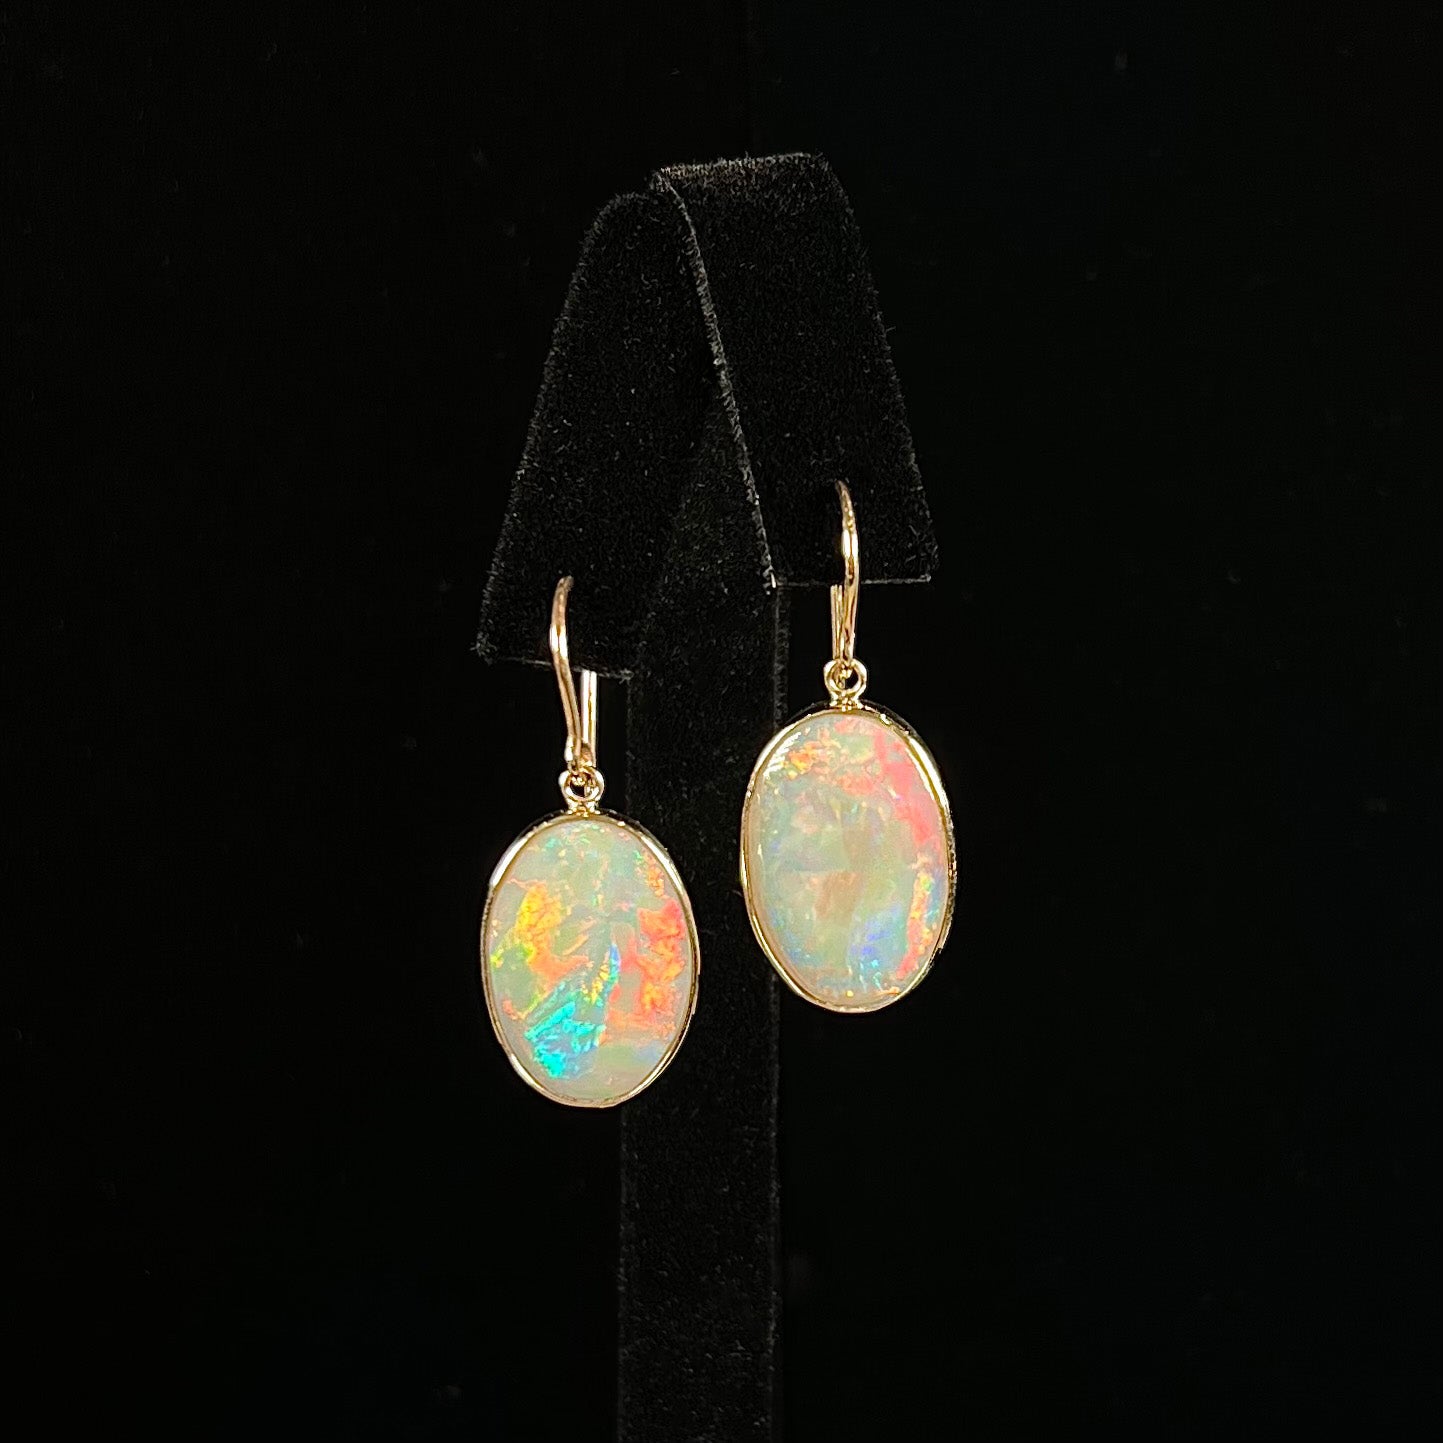 A pair of yellow gold earrings bezel set with oval cabochon cut natural opal stones.